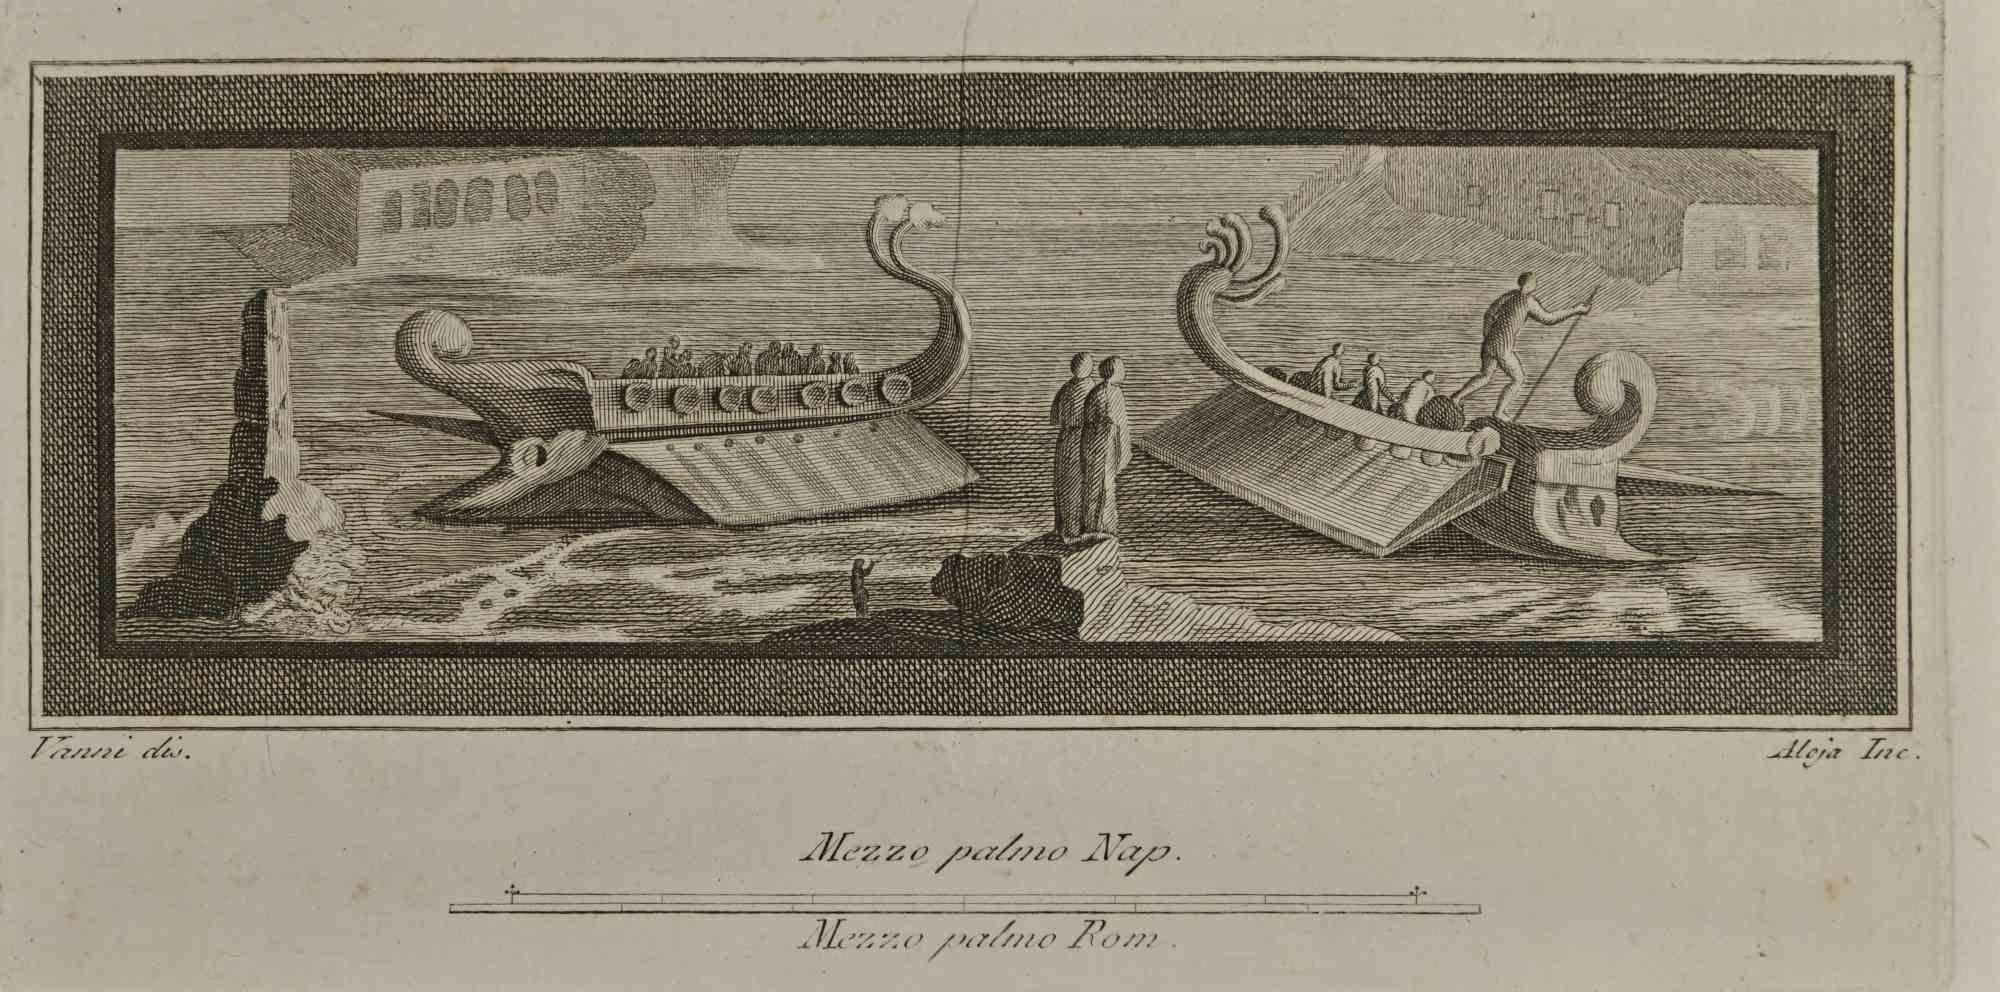 Ancient Roman Boats from the series "Antiquities of Herculaneum", is anetching on paper realized by Giuseppe Aloja in the 18th Century.
Signed on the plate.
Good conditions.
The etching belongs to the print suite “Antiquities of Herculaneum Exposed”